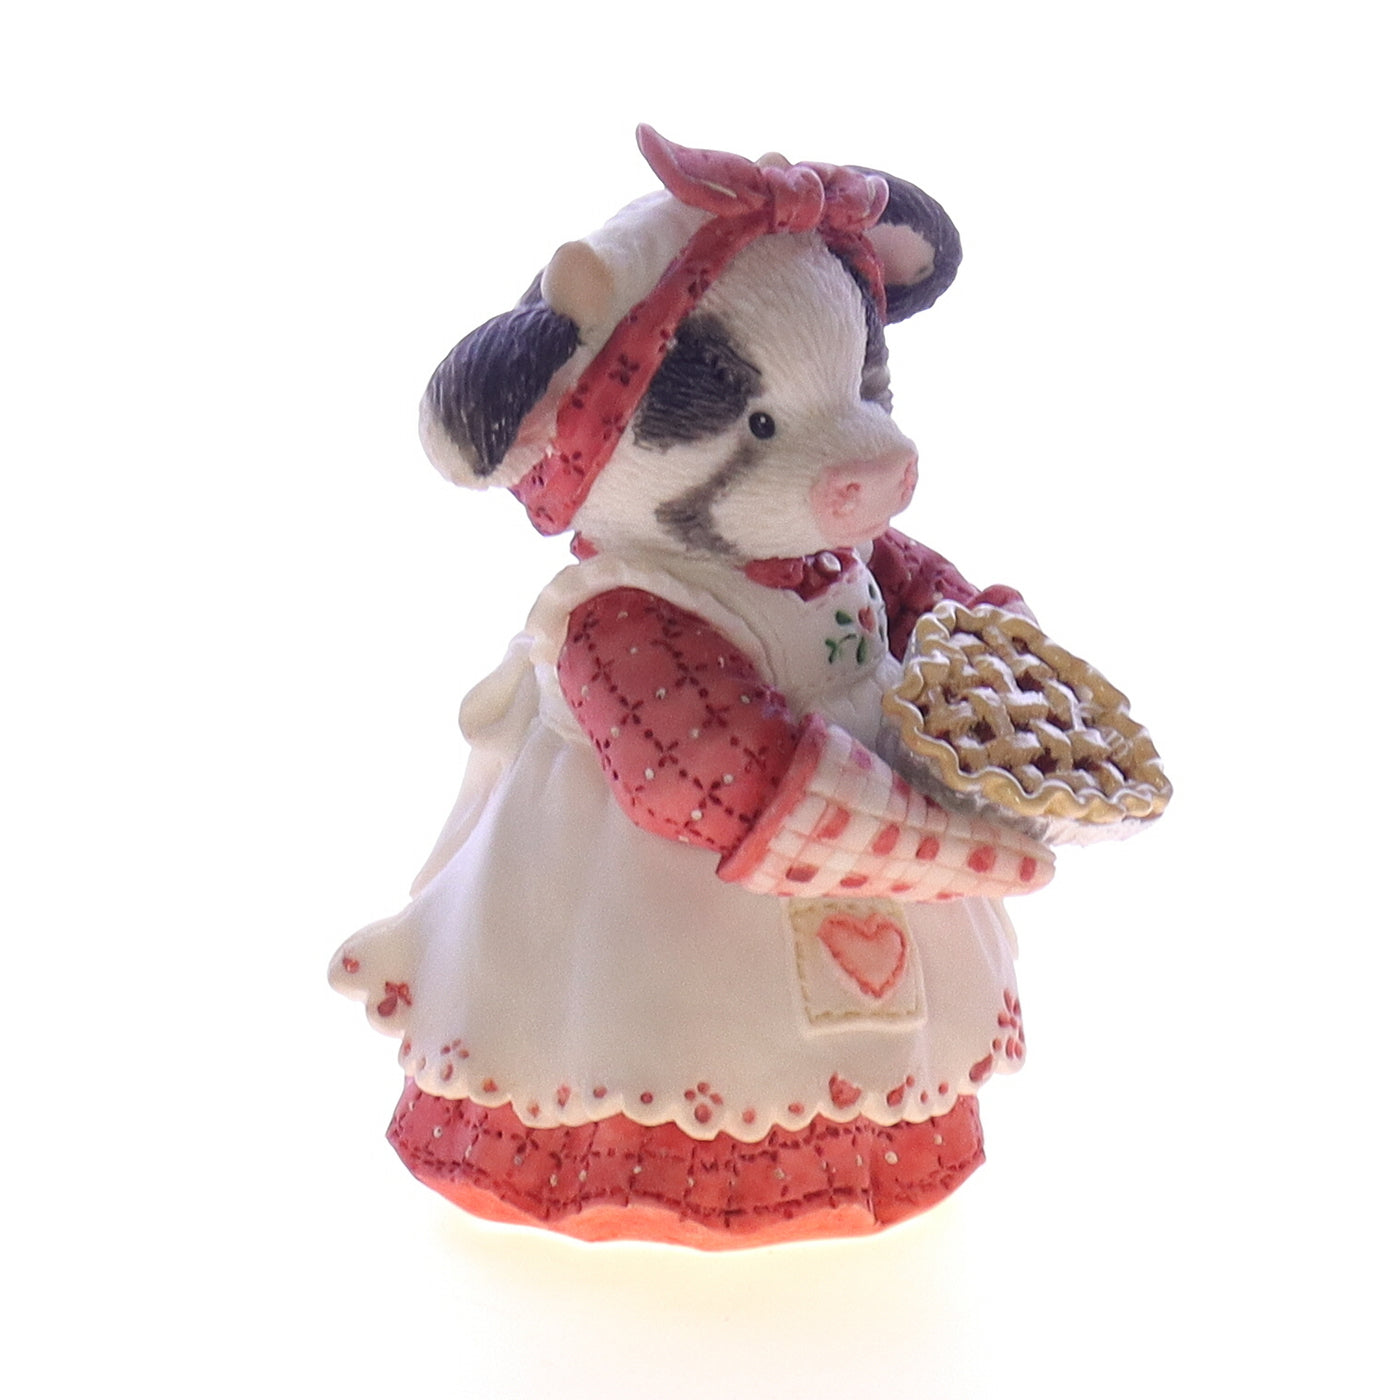 Marys_Moo_Moos_104272_Youre_My_Sweetie_Pie_Valentines_Day_Figurine_1994_Box Front Right View